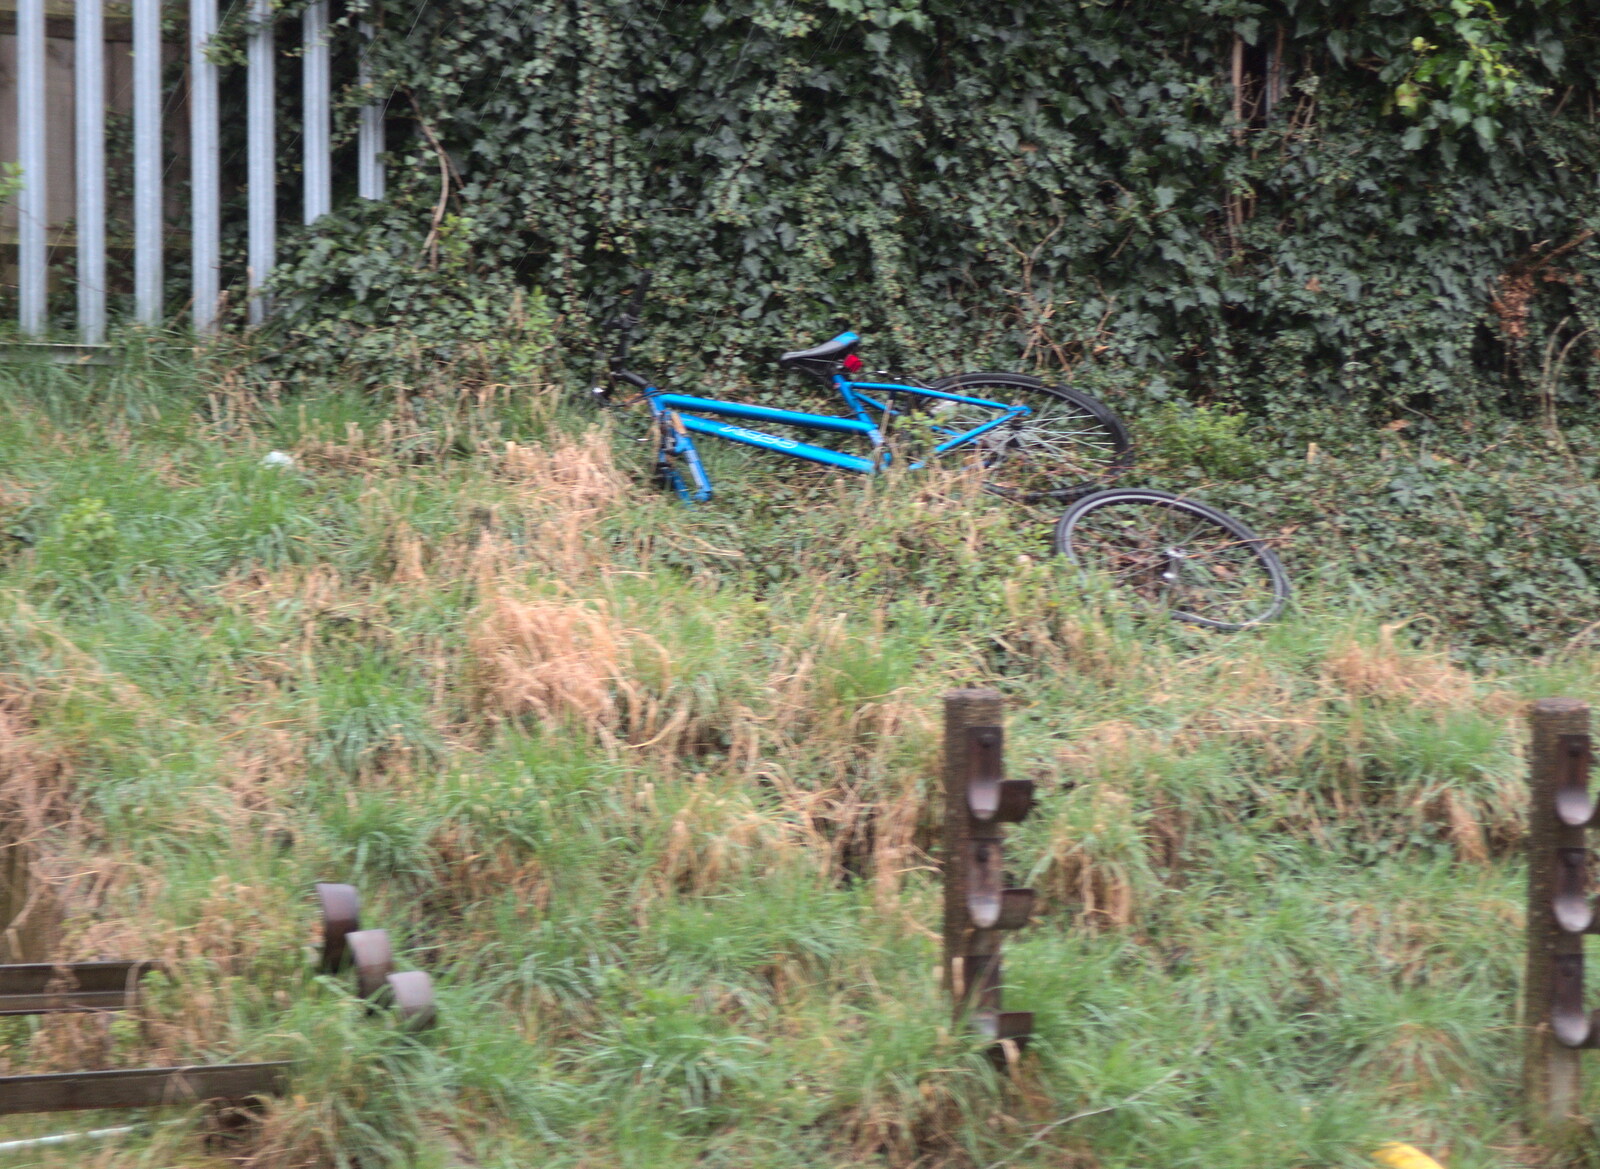 A discarded bicycle from Trackside Graffiti, and Harry's Cake, London and Suffolk - 28th March 2018